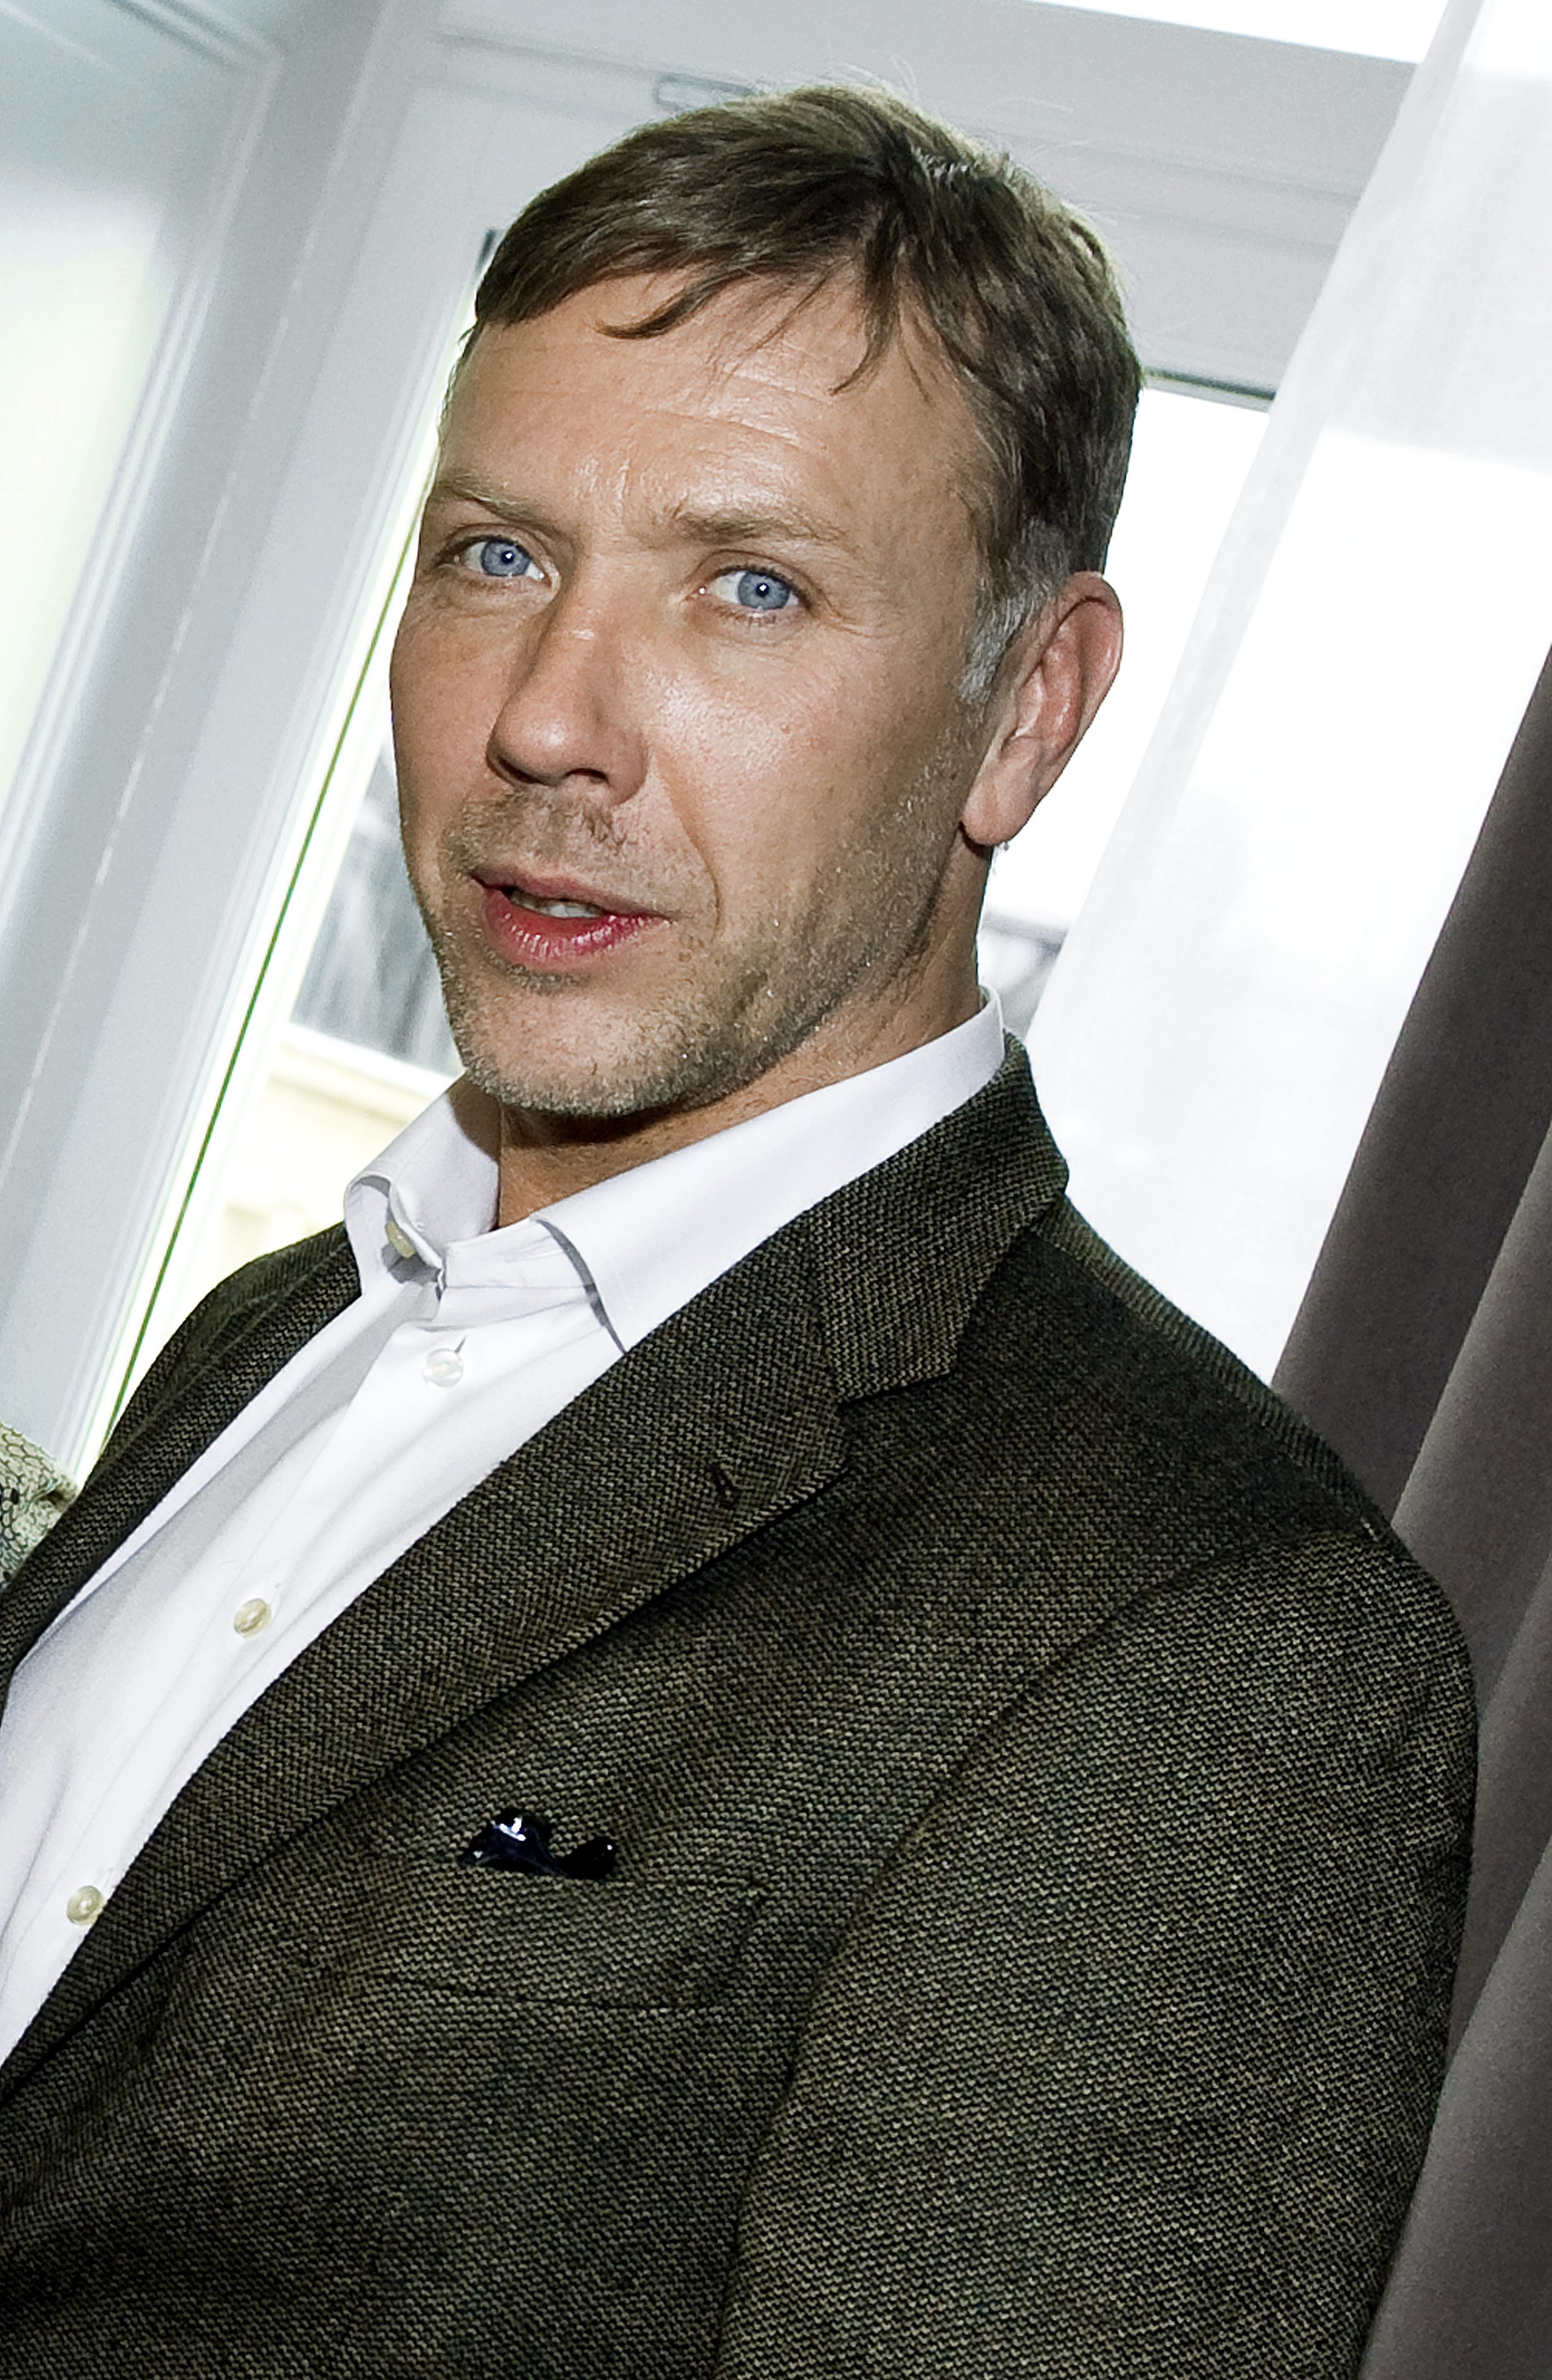 Ola Rapace, Mikael Persbrandt, Hollywood, Fight, Slåss, Film